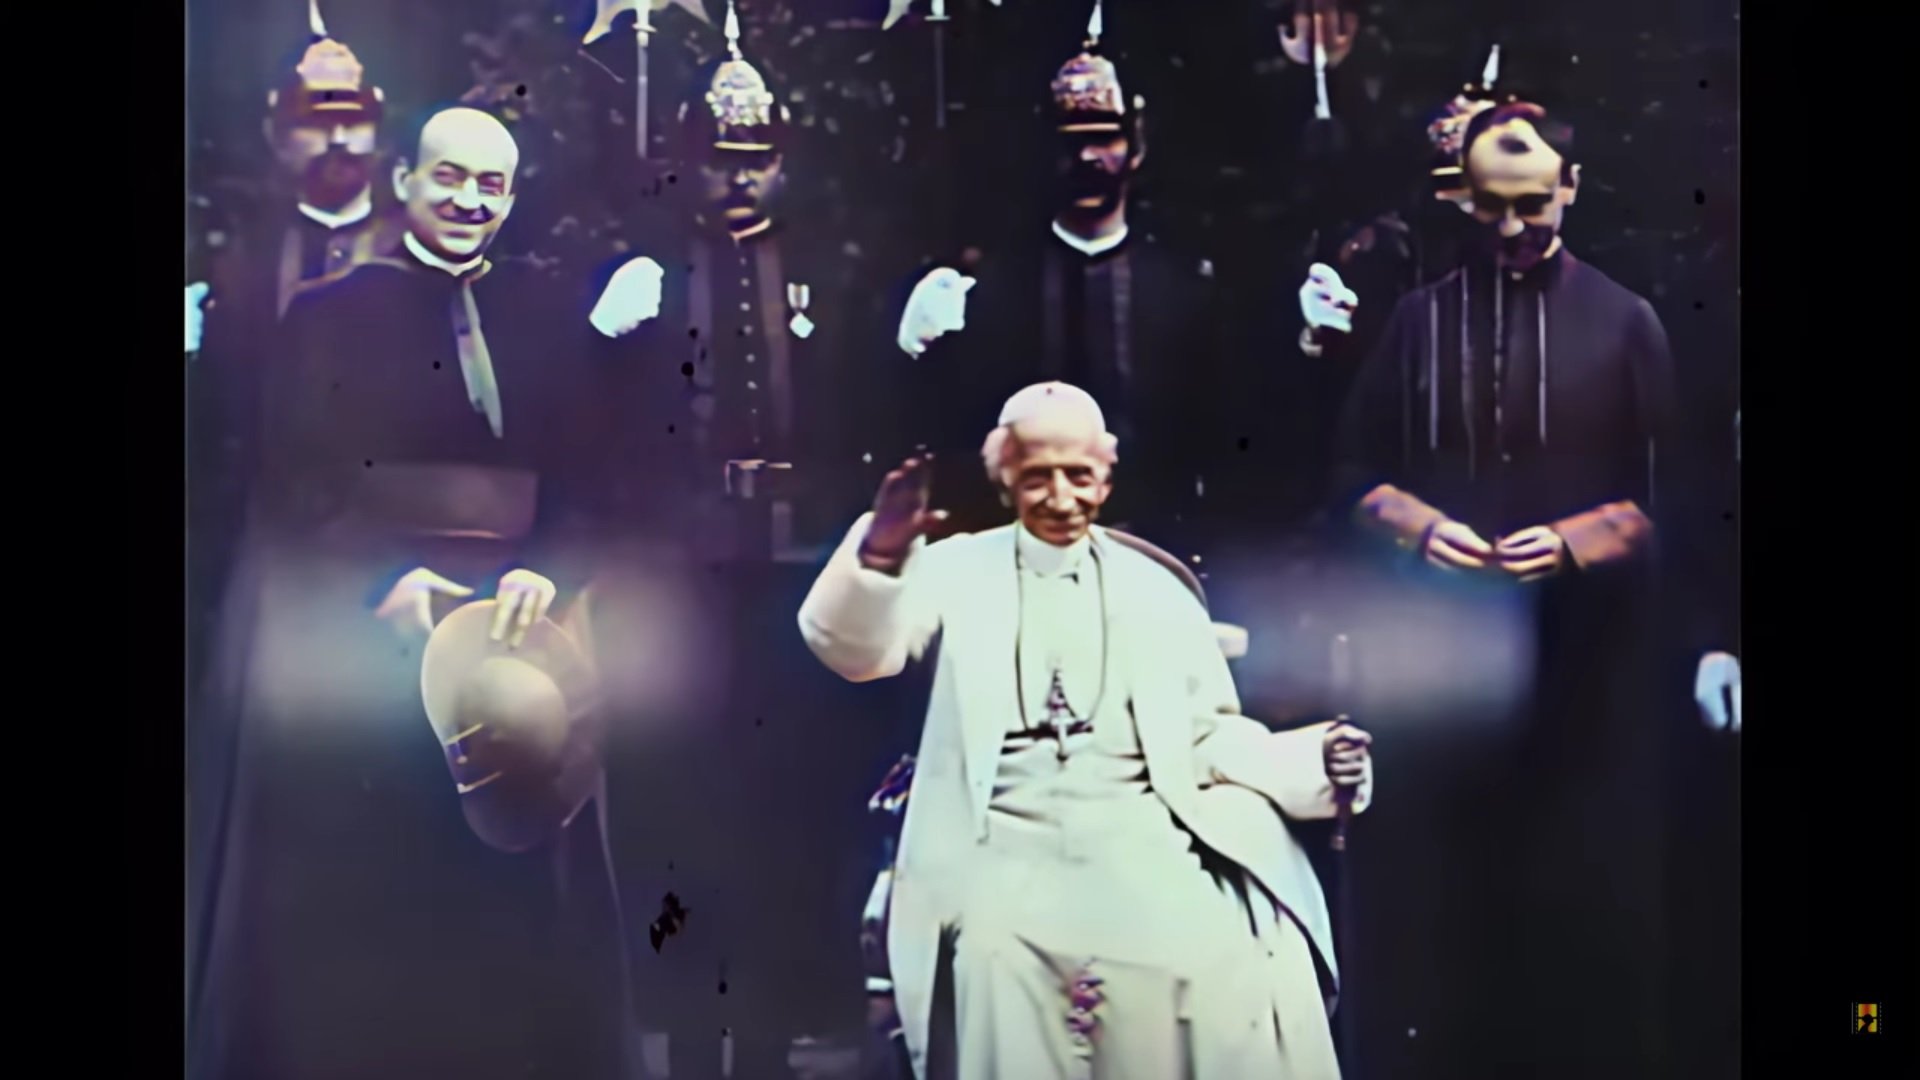 1896 Footage May Reveal New Details Of Pope Leo XIII, Earliest-Born Person On Film